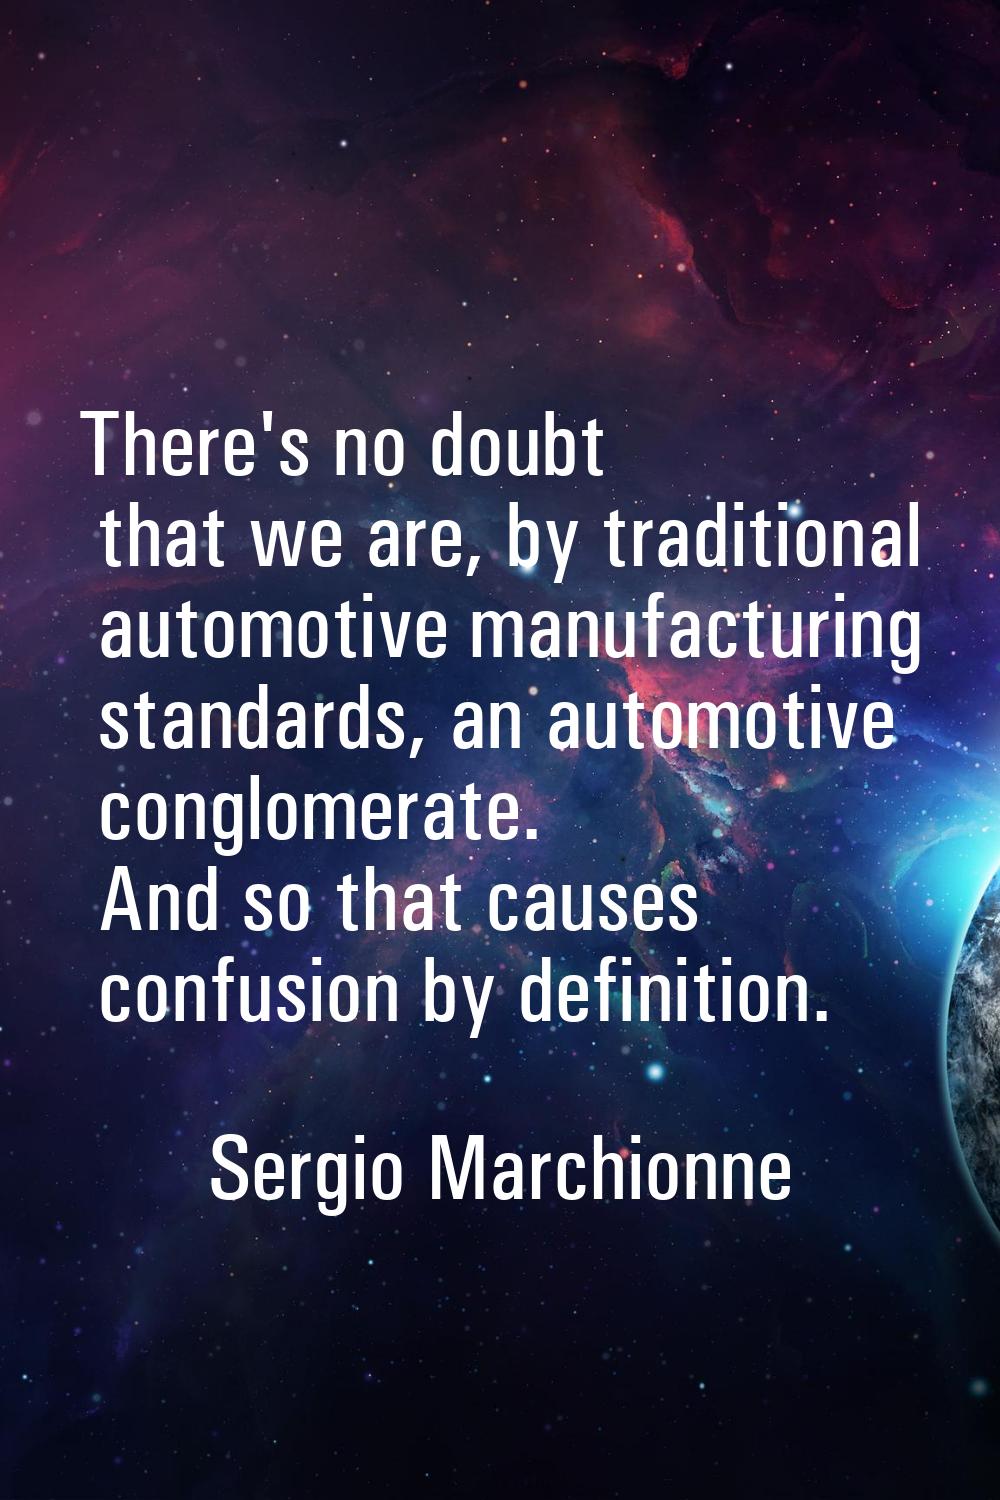 There's no doubt that we are, by traditional automotive manufacturing standards, an automotive cong